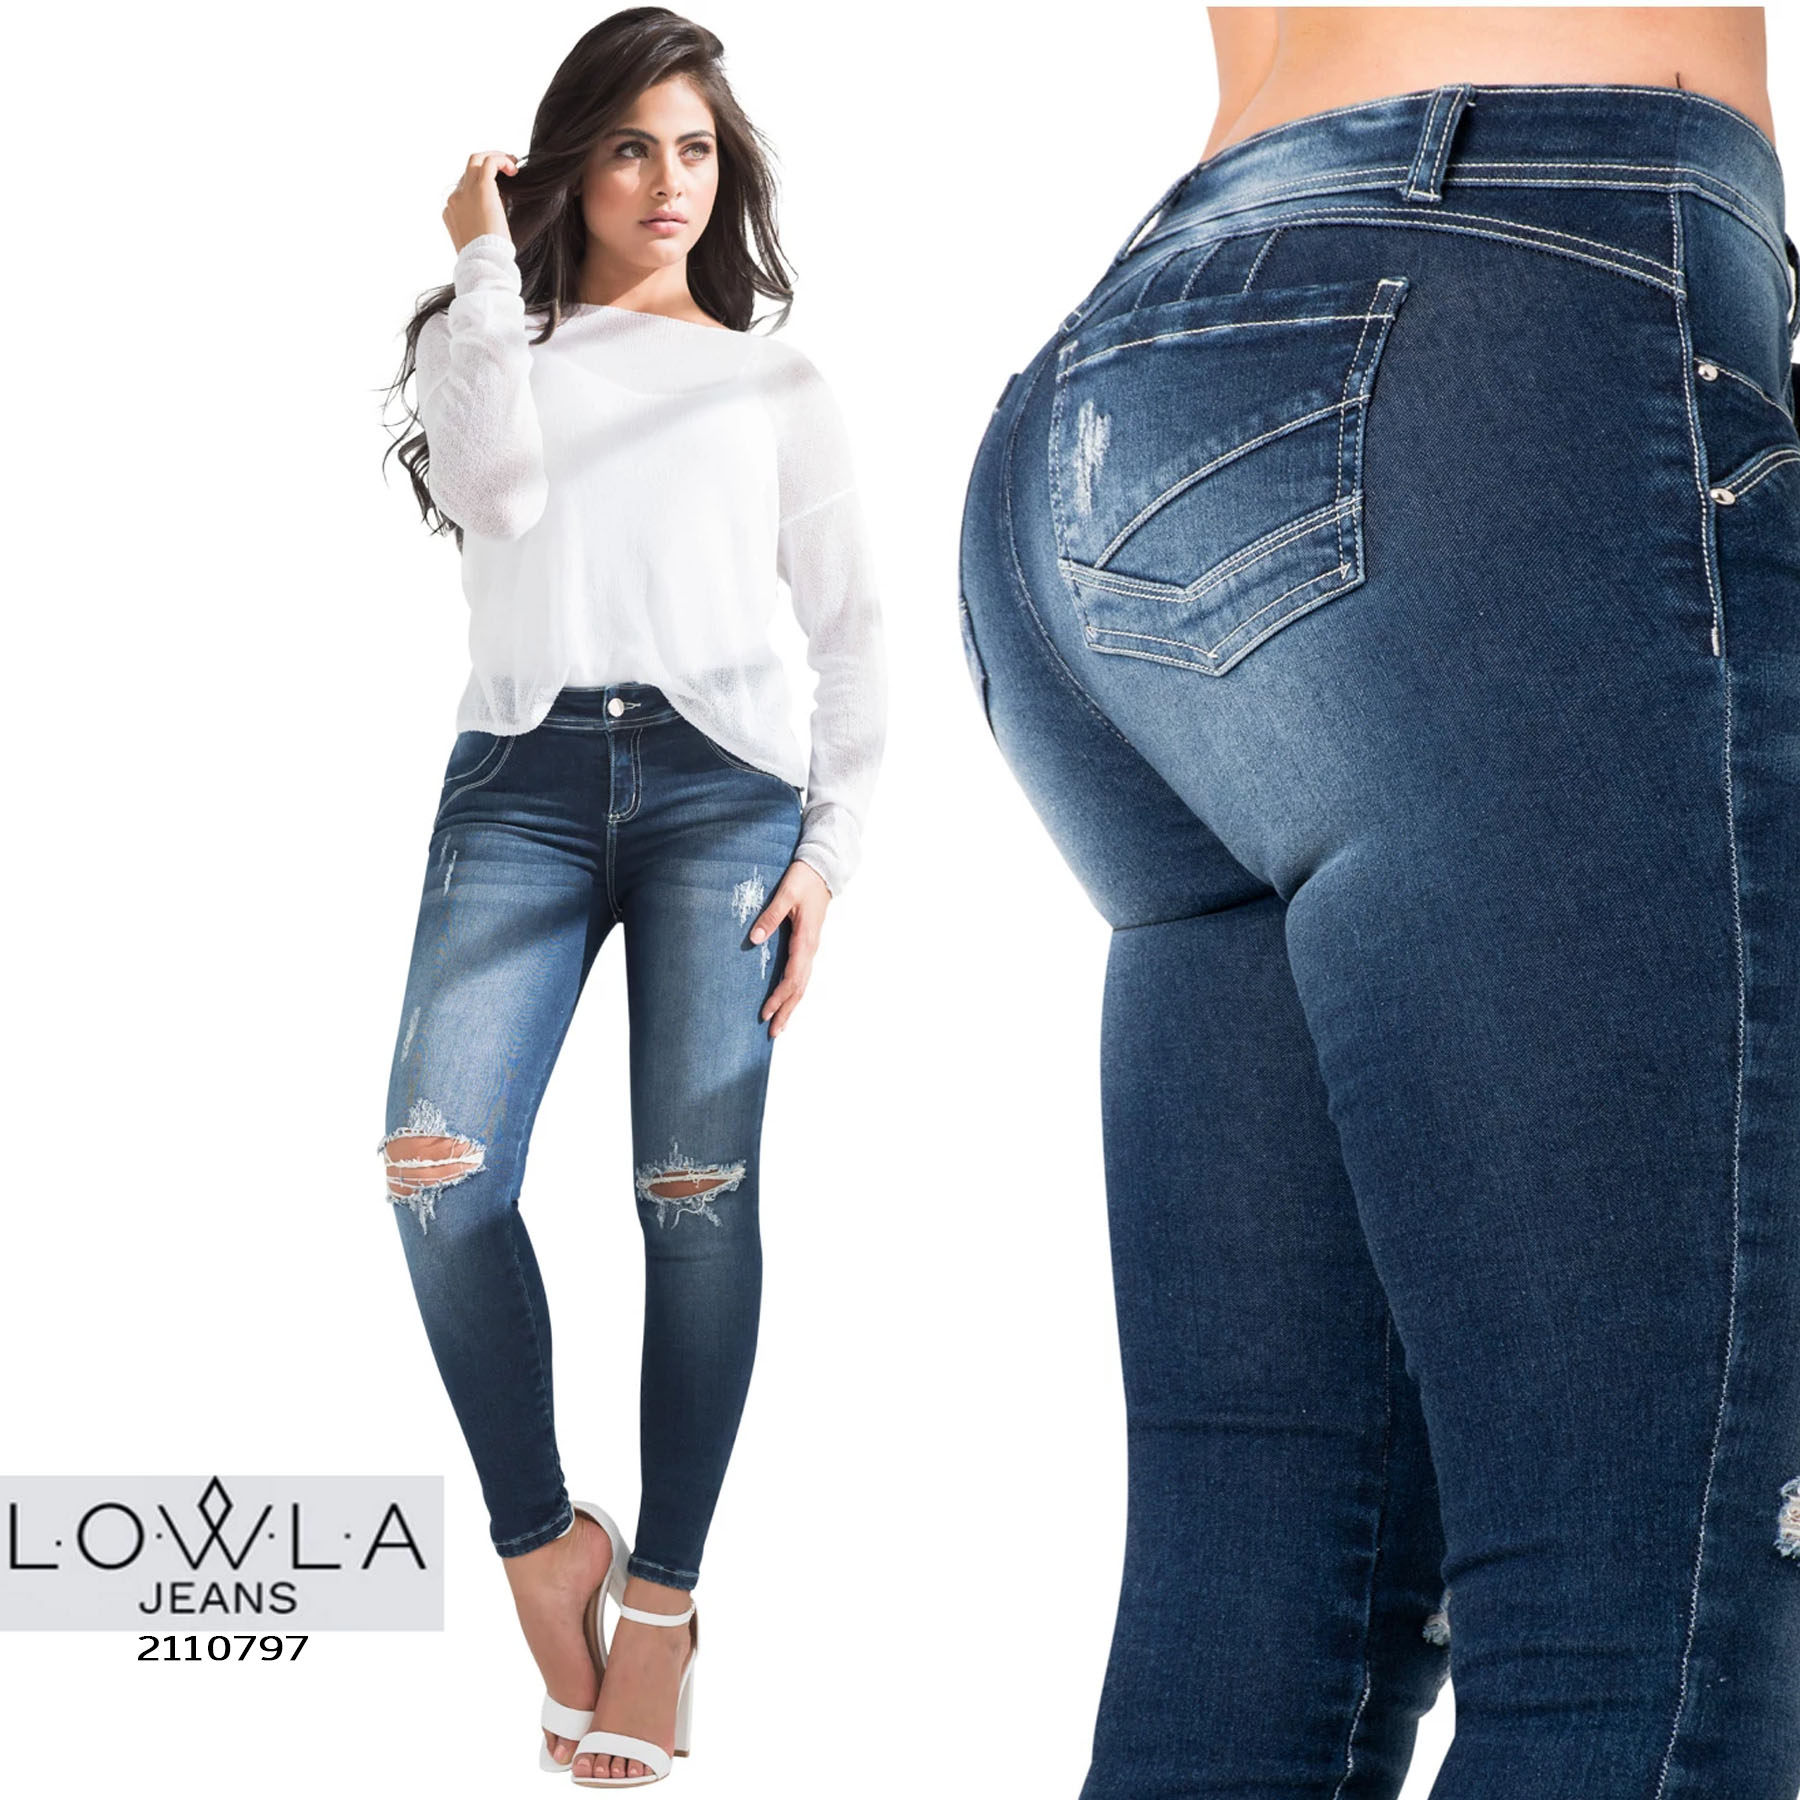 Colombian Design High Waist Butt Lift Jeans Colombiano Lowla 217988 Levanta Cola